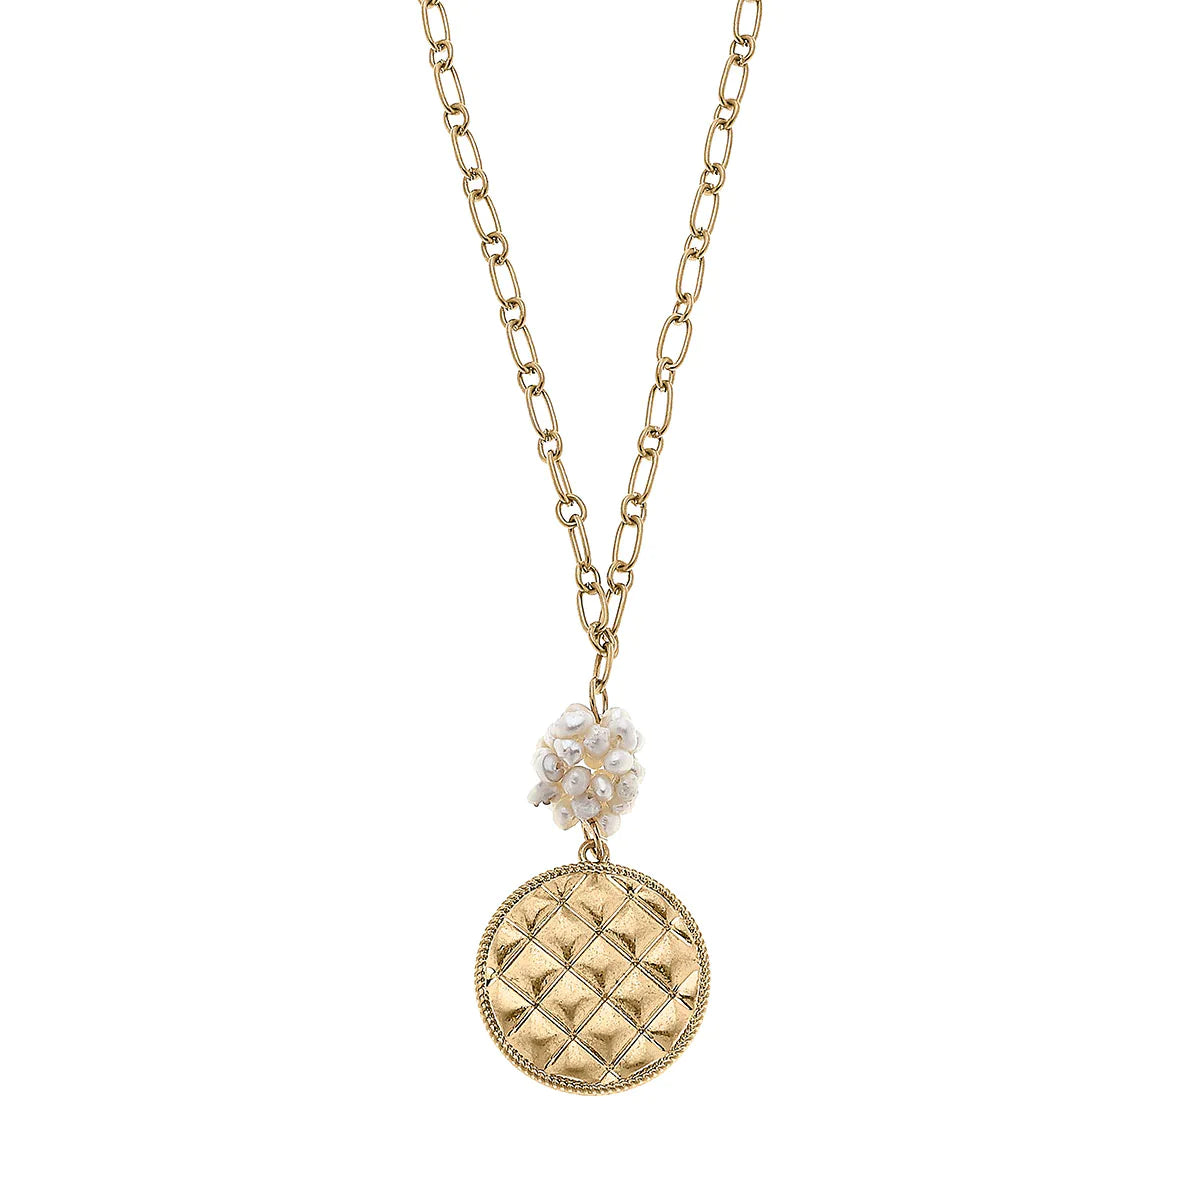 Giada Pearl Cluster & Quilted Metal Pendant Necklace in Worn Gold